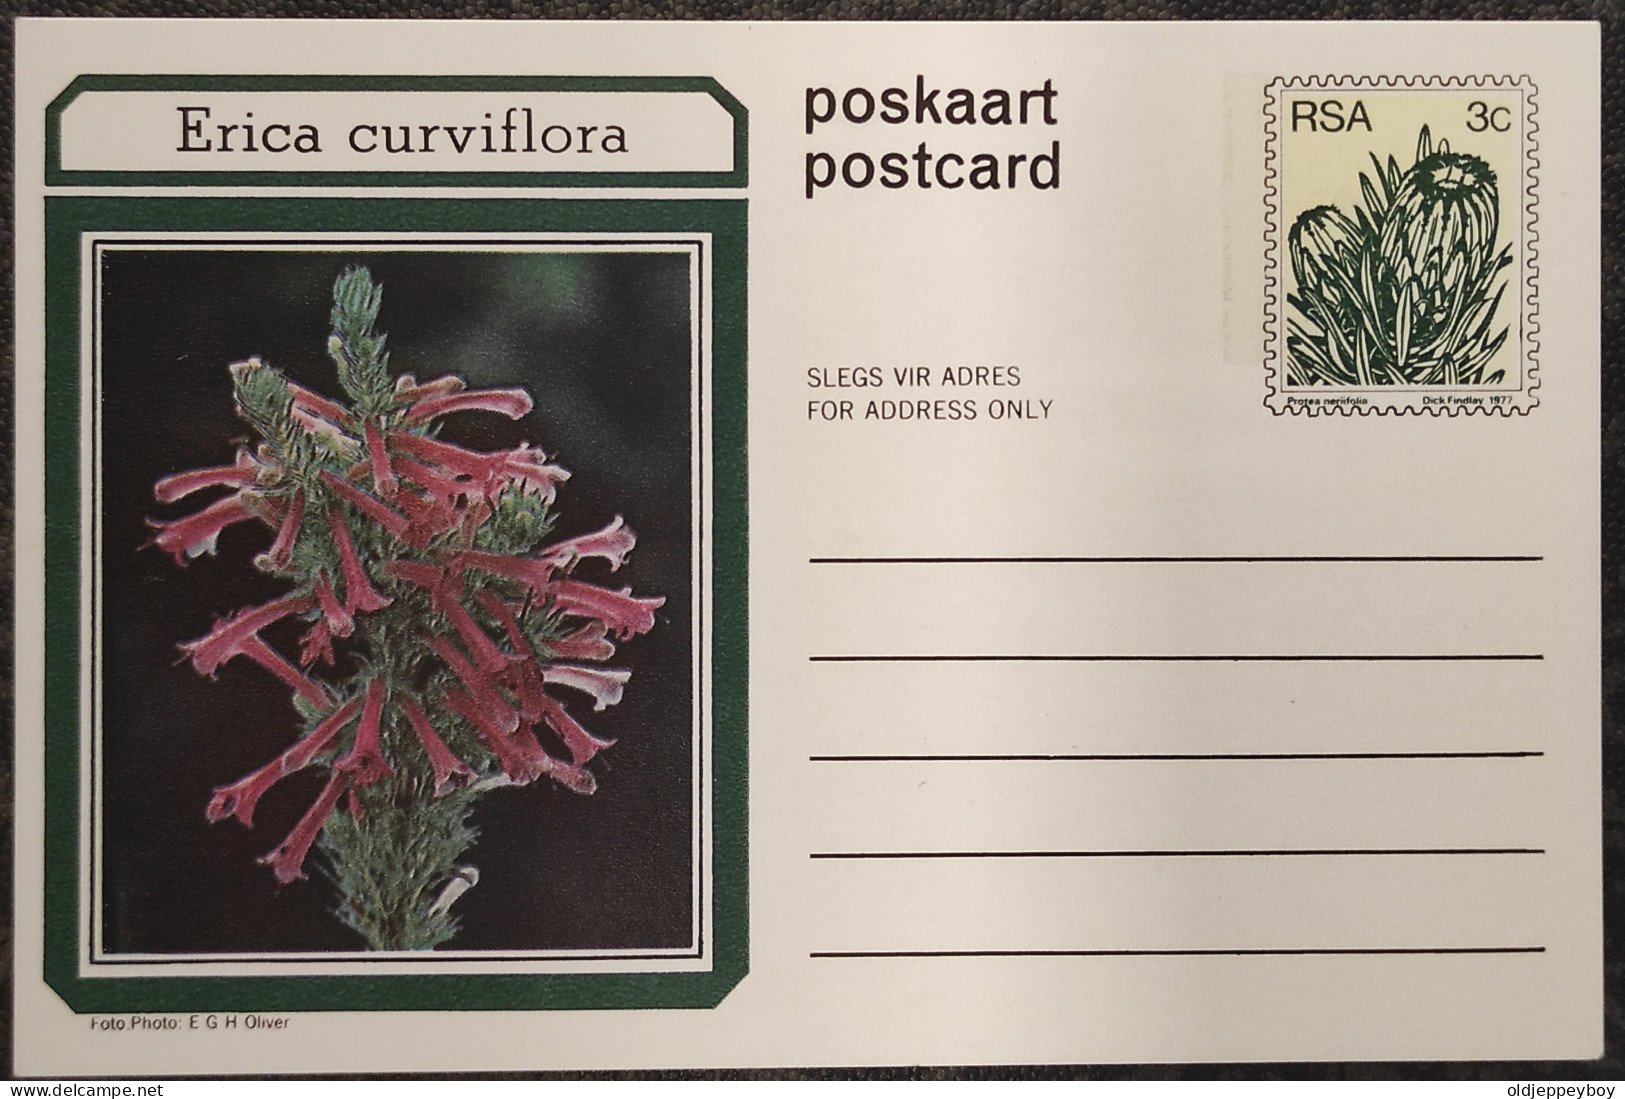 3c SOUTH AFRICA Postal STATIONERY CARD Illus ERICA CURVIFLORA FLOWER Cover Stamps Flowers Rsa - Lettres & Documents